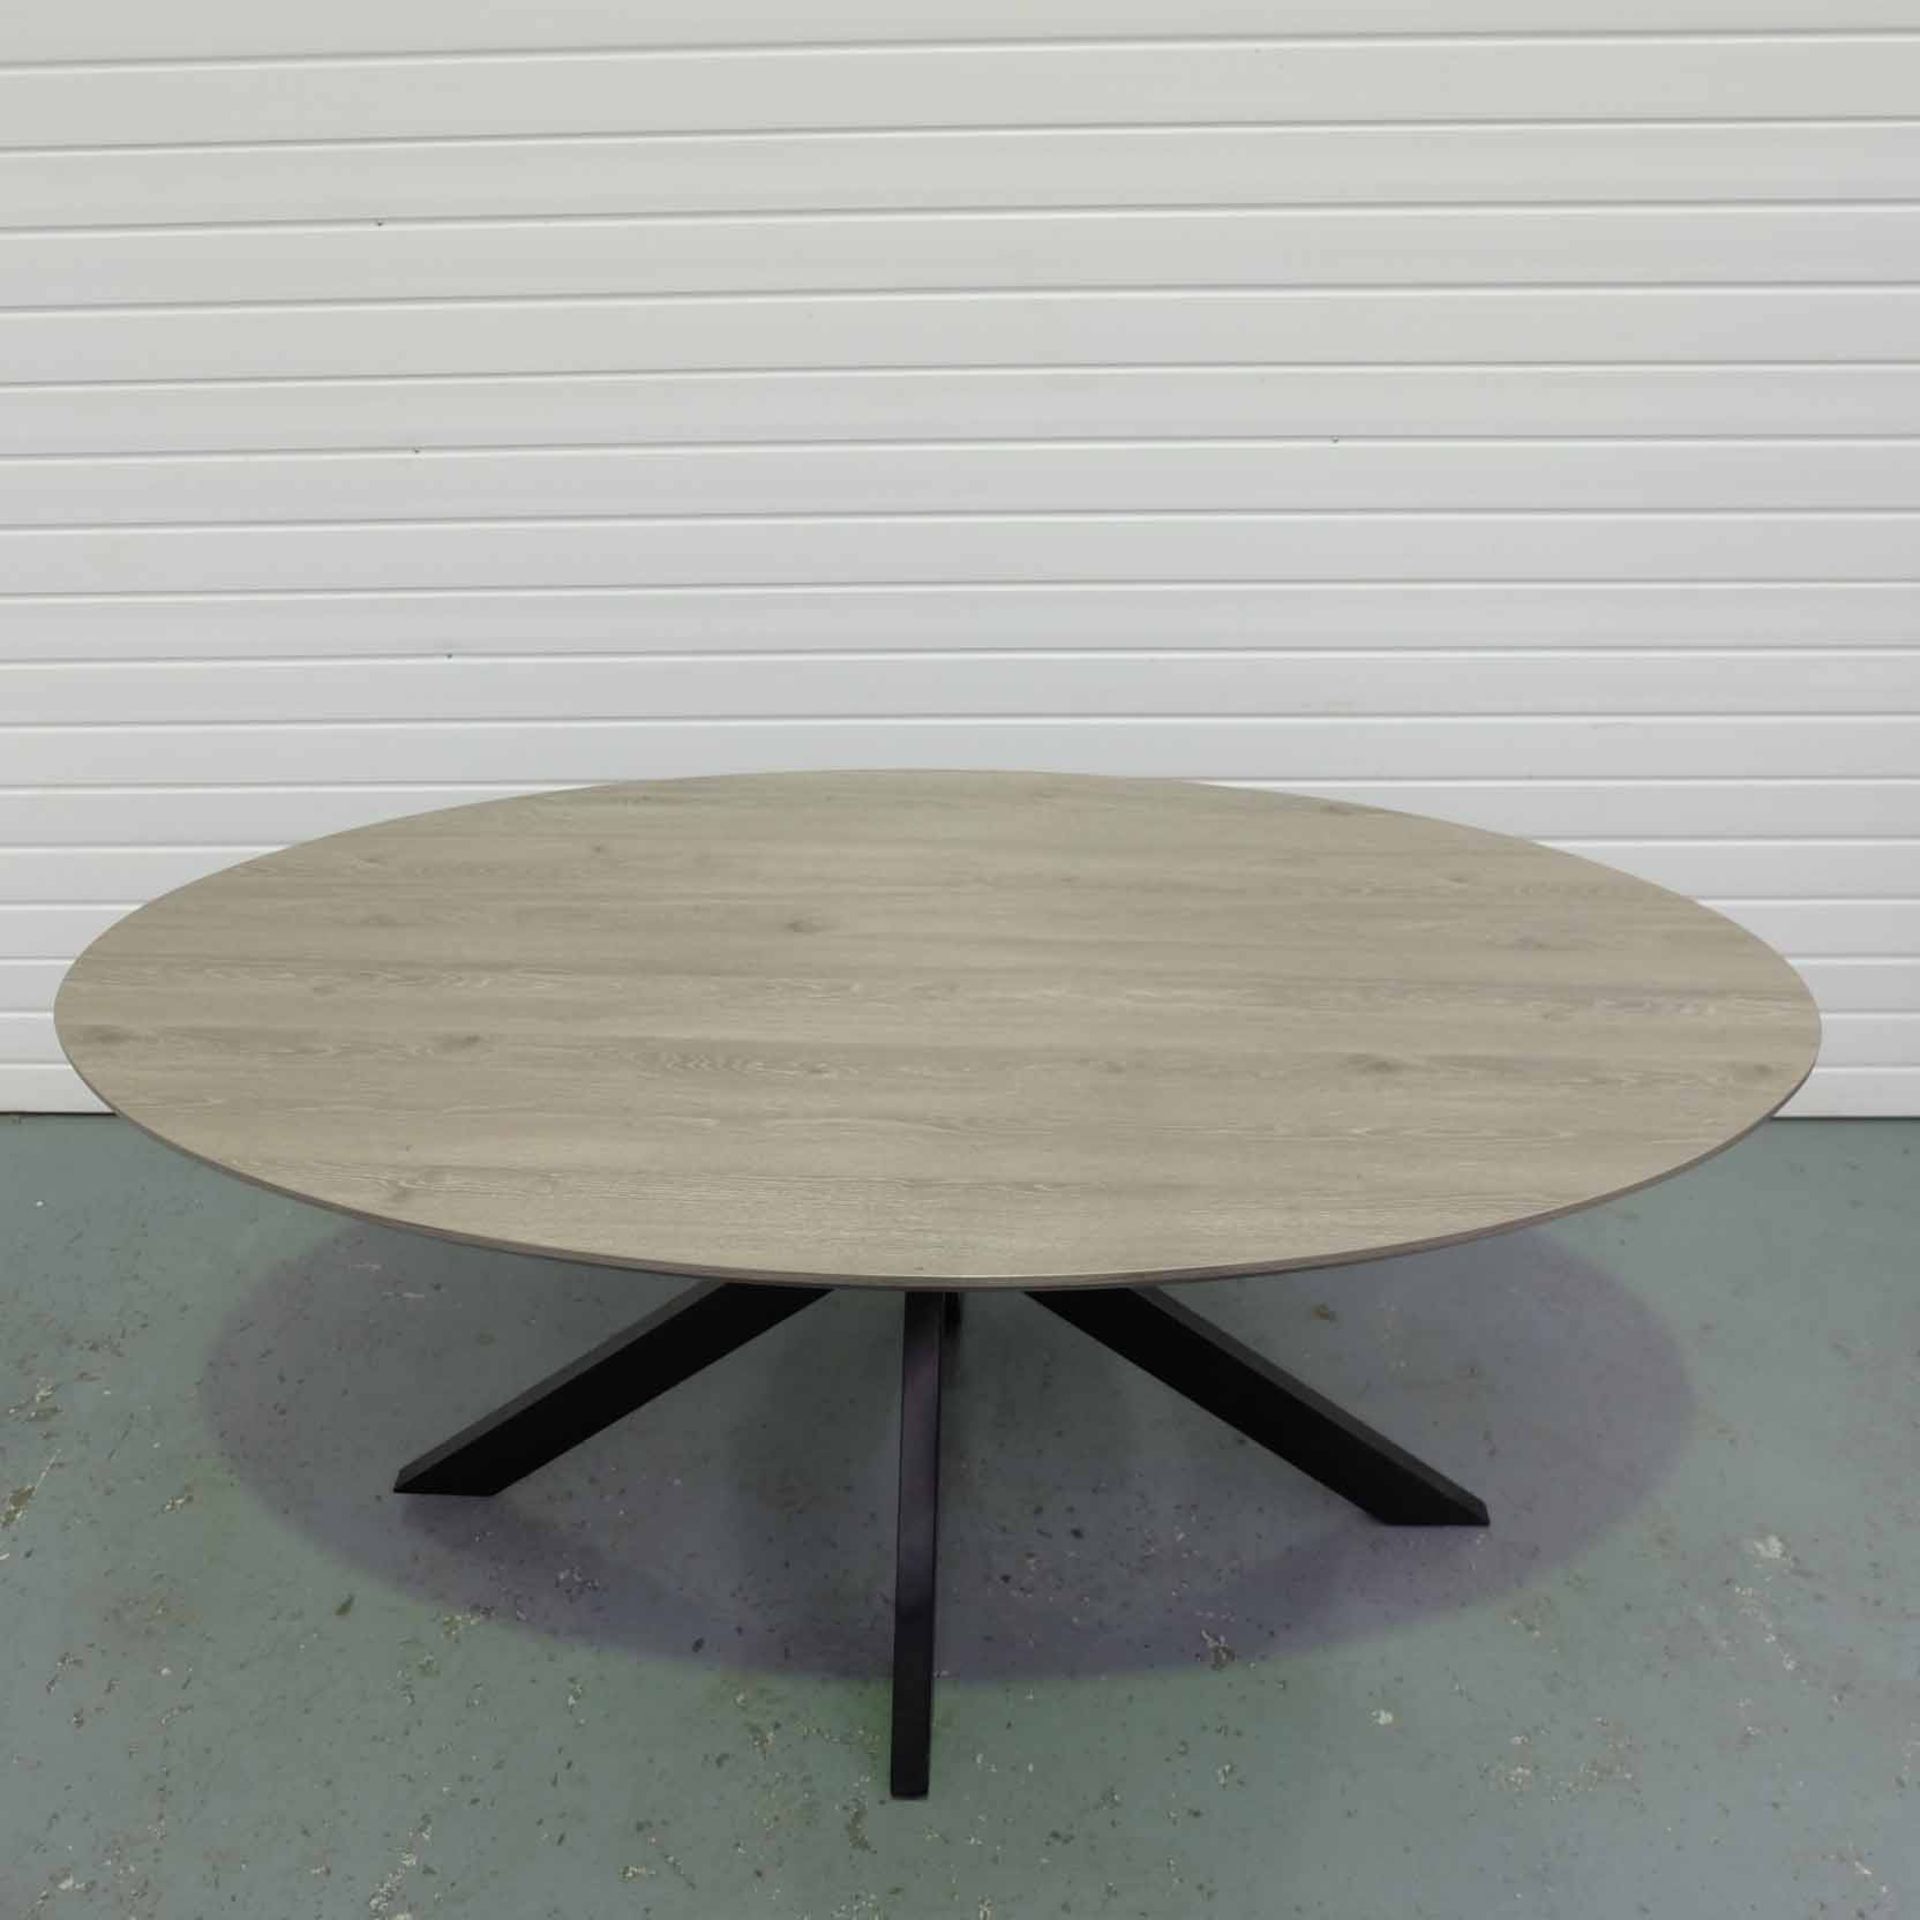 Furniture Link 'Manhattan' Oval Dining Table. SmarTops® Technology (Heat, Stain and Scratch resistan - Image 3 of 4